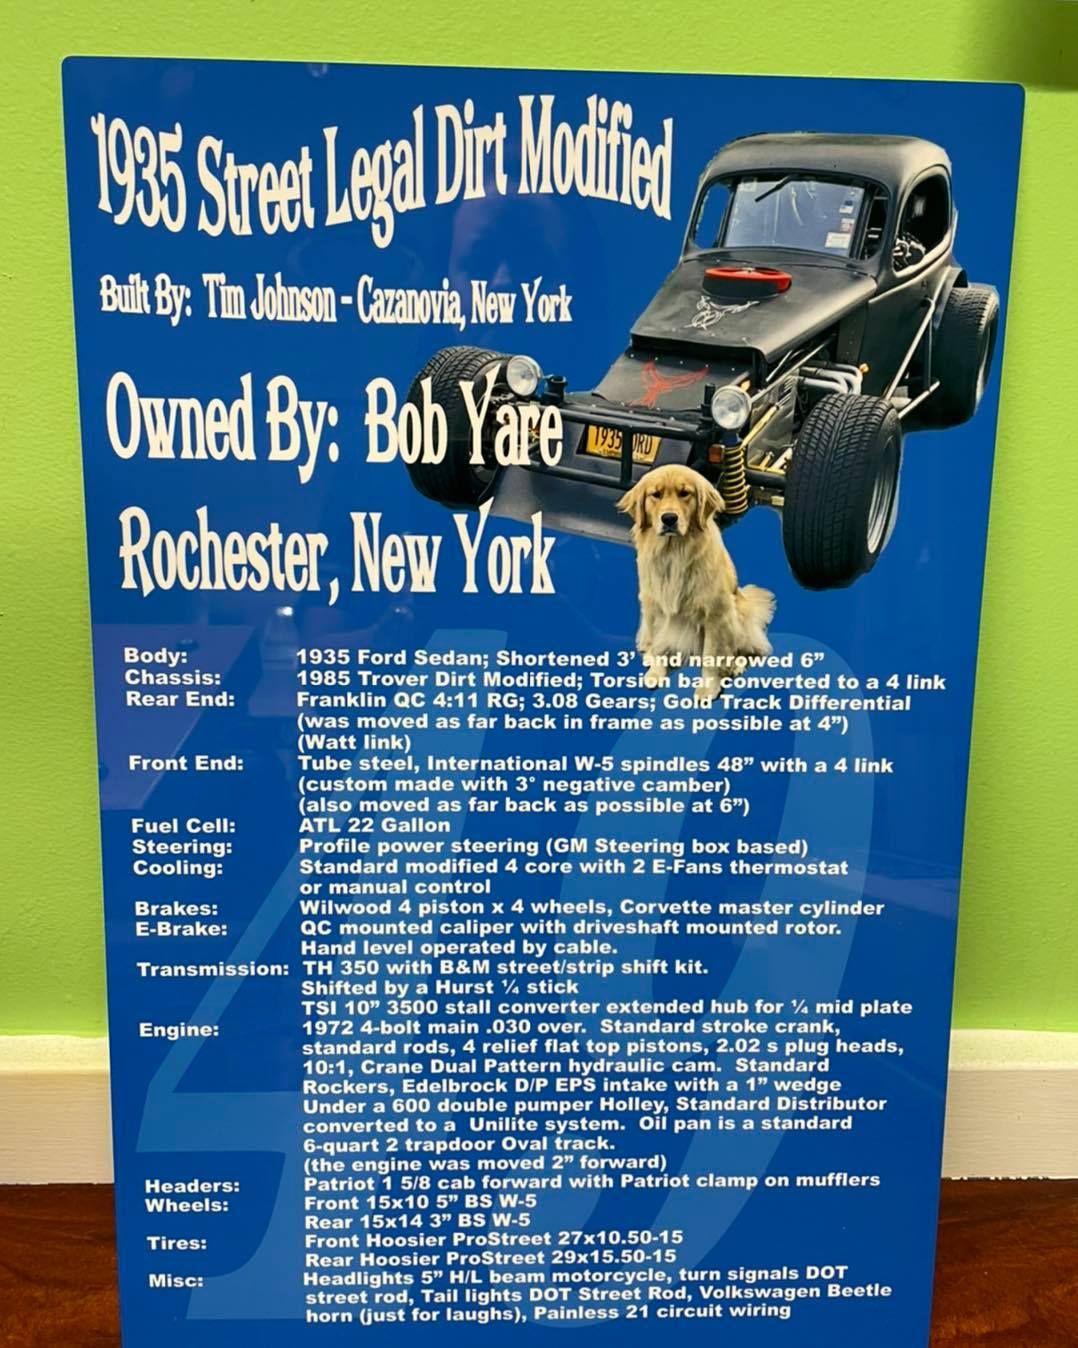 I make customers display boards for their race cars and classic cars.  This is one I have done